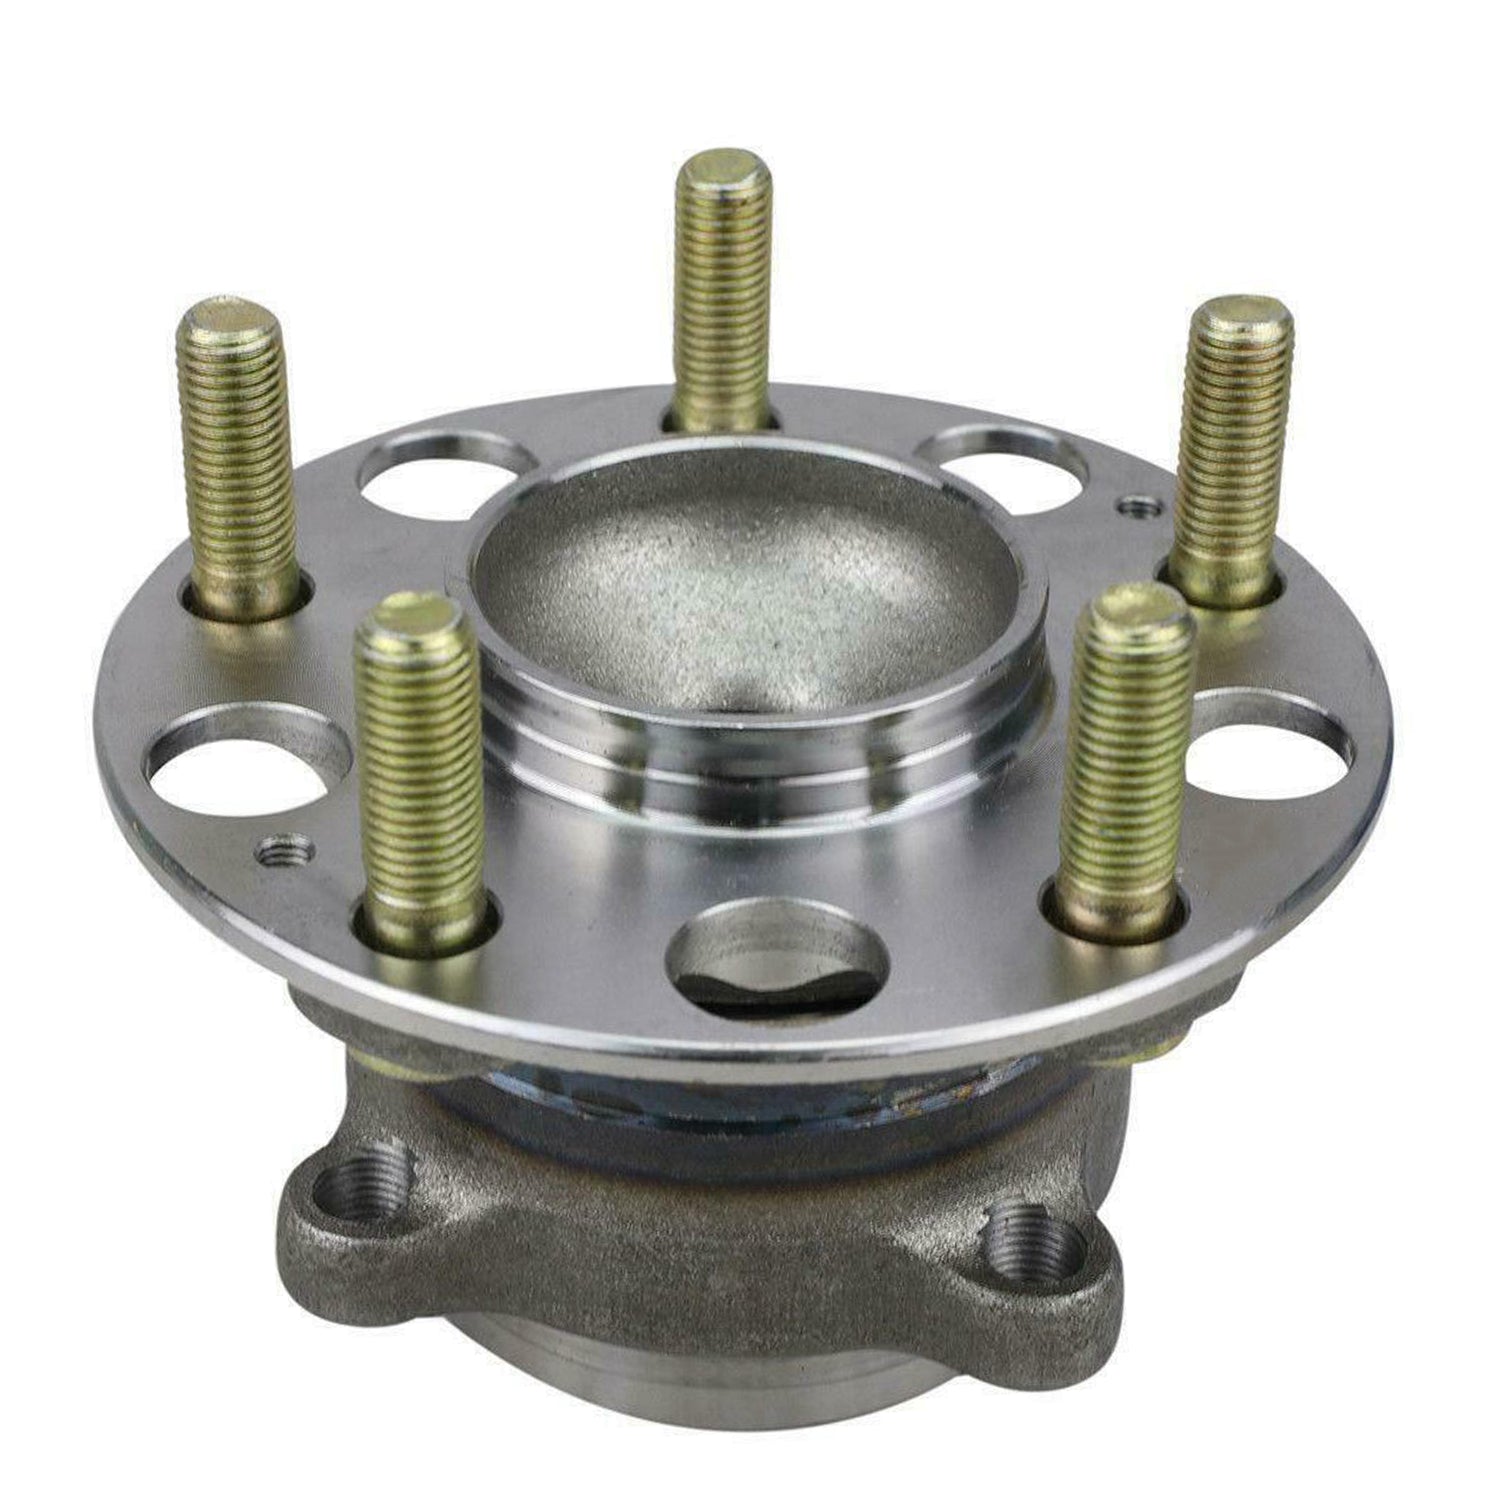 MotorbyMotor 512516 Rear Wheel Bearing and Hub Assembly with 5 Lugs fits for Honda Accord (2.0L L4 Electric/Gas Models Only) Low-Runout OE Directly Replacement Hub Bearing MotorbyMotor